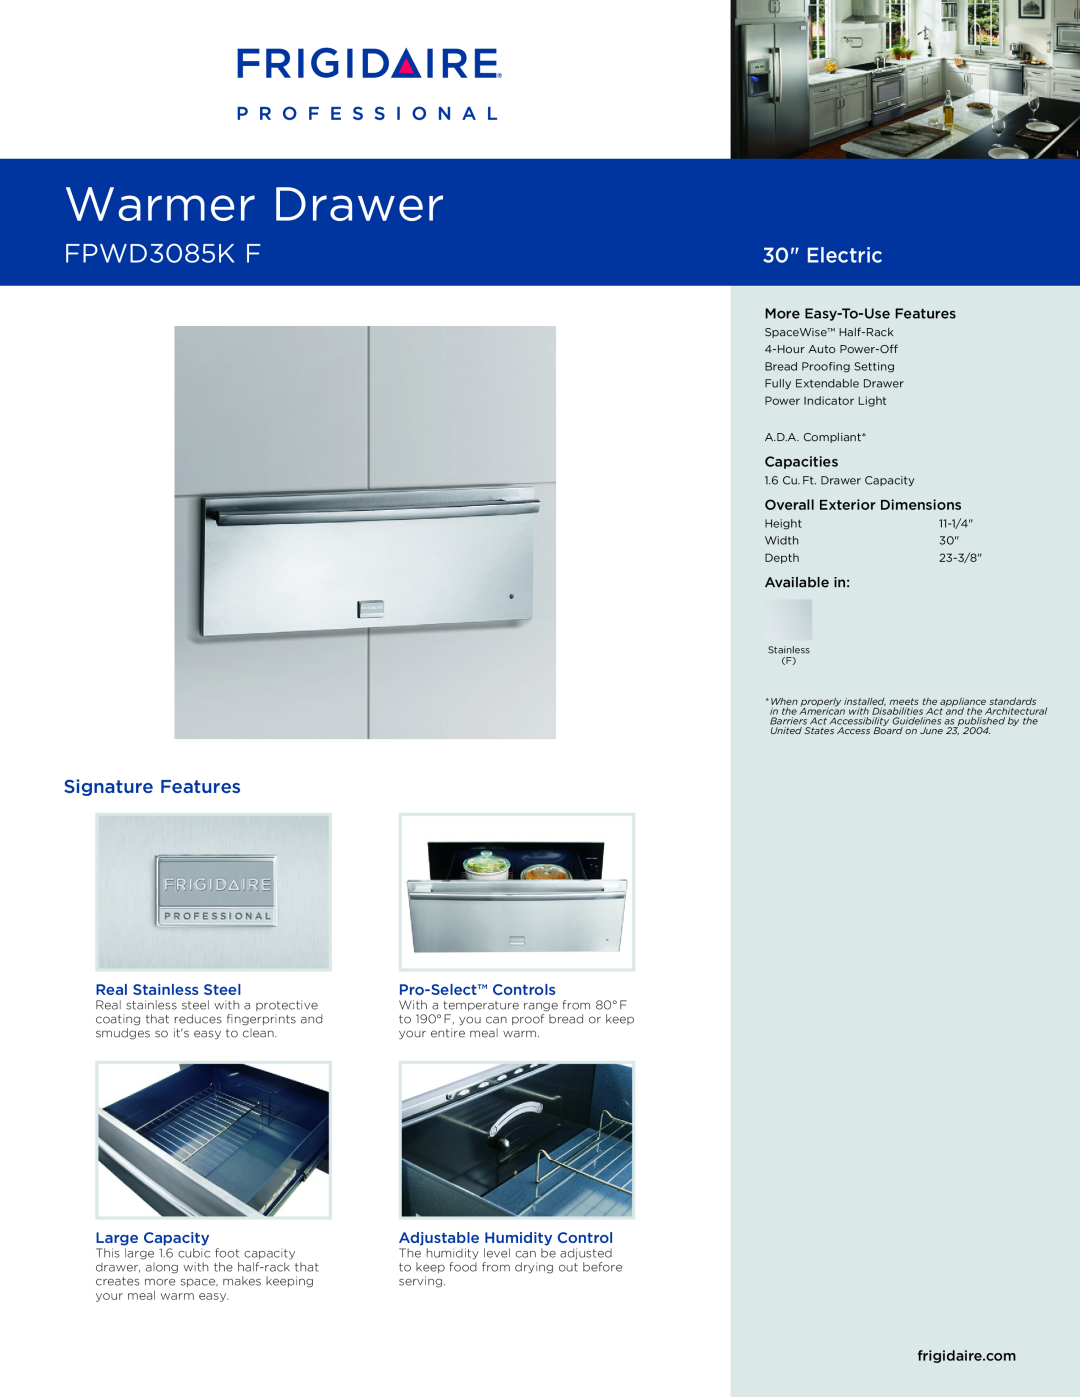 Frigidaire FPWD3085KF dimensions Real Stainless Steel, Pro-SelectControls, Large Capacity, Adjustable Humidity Control 